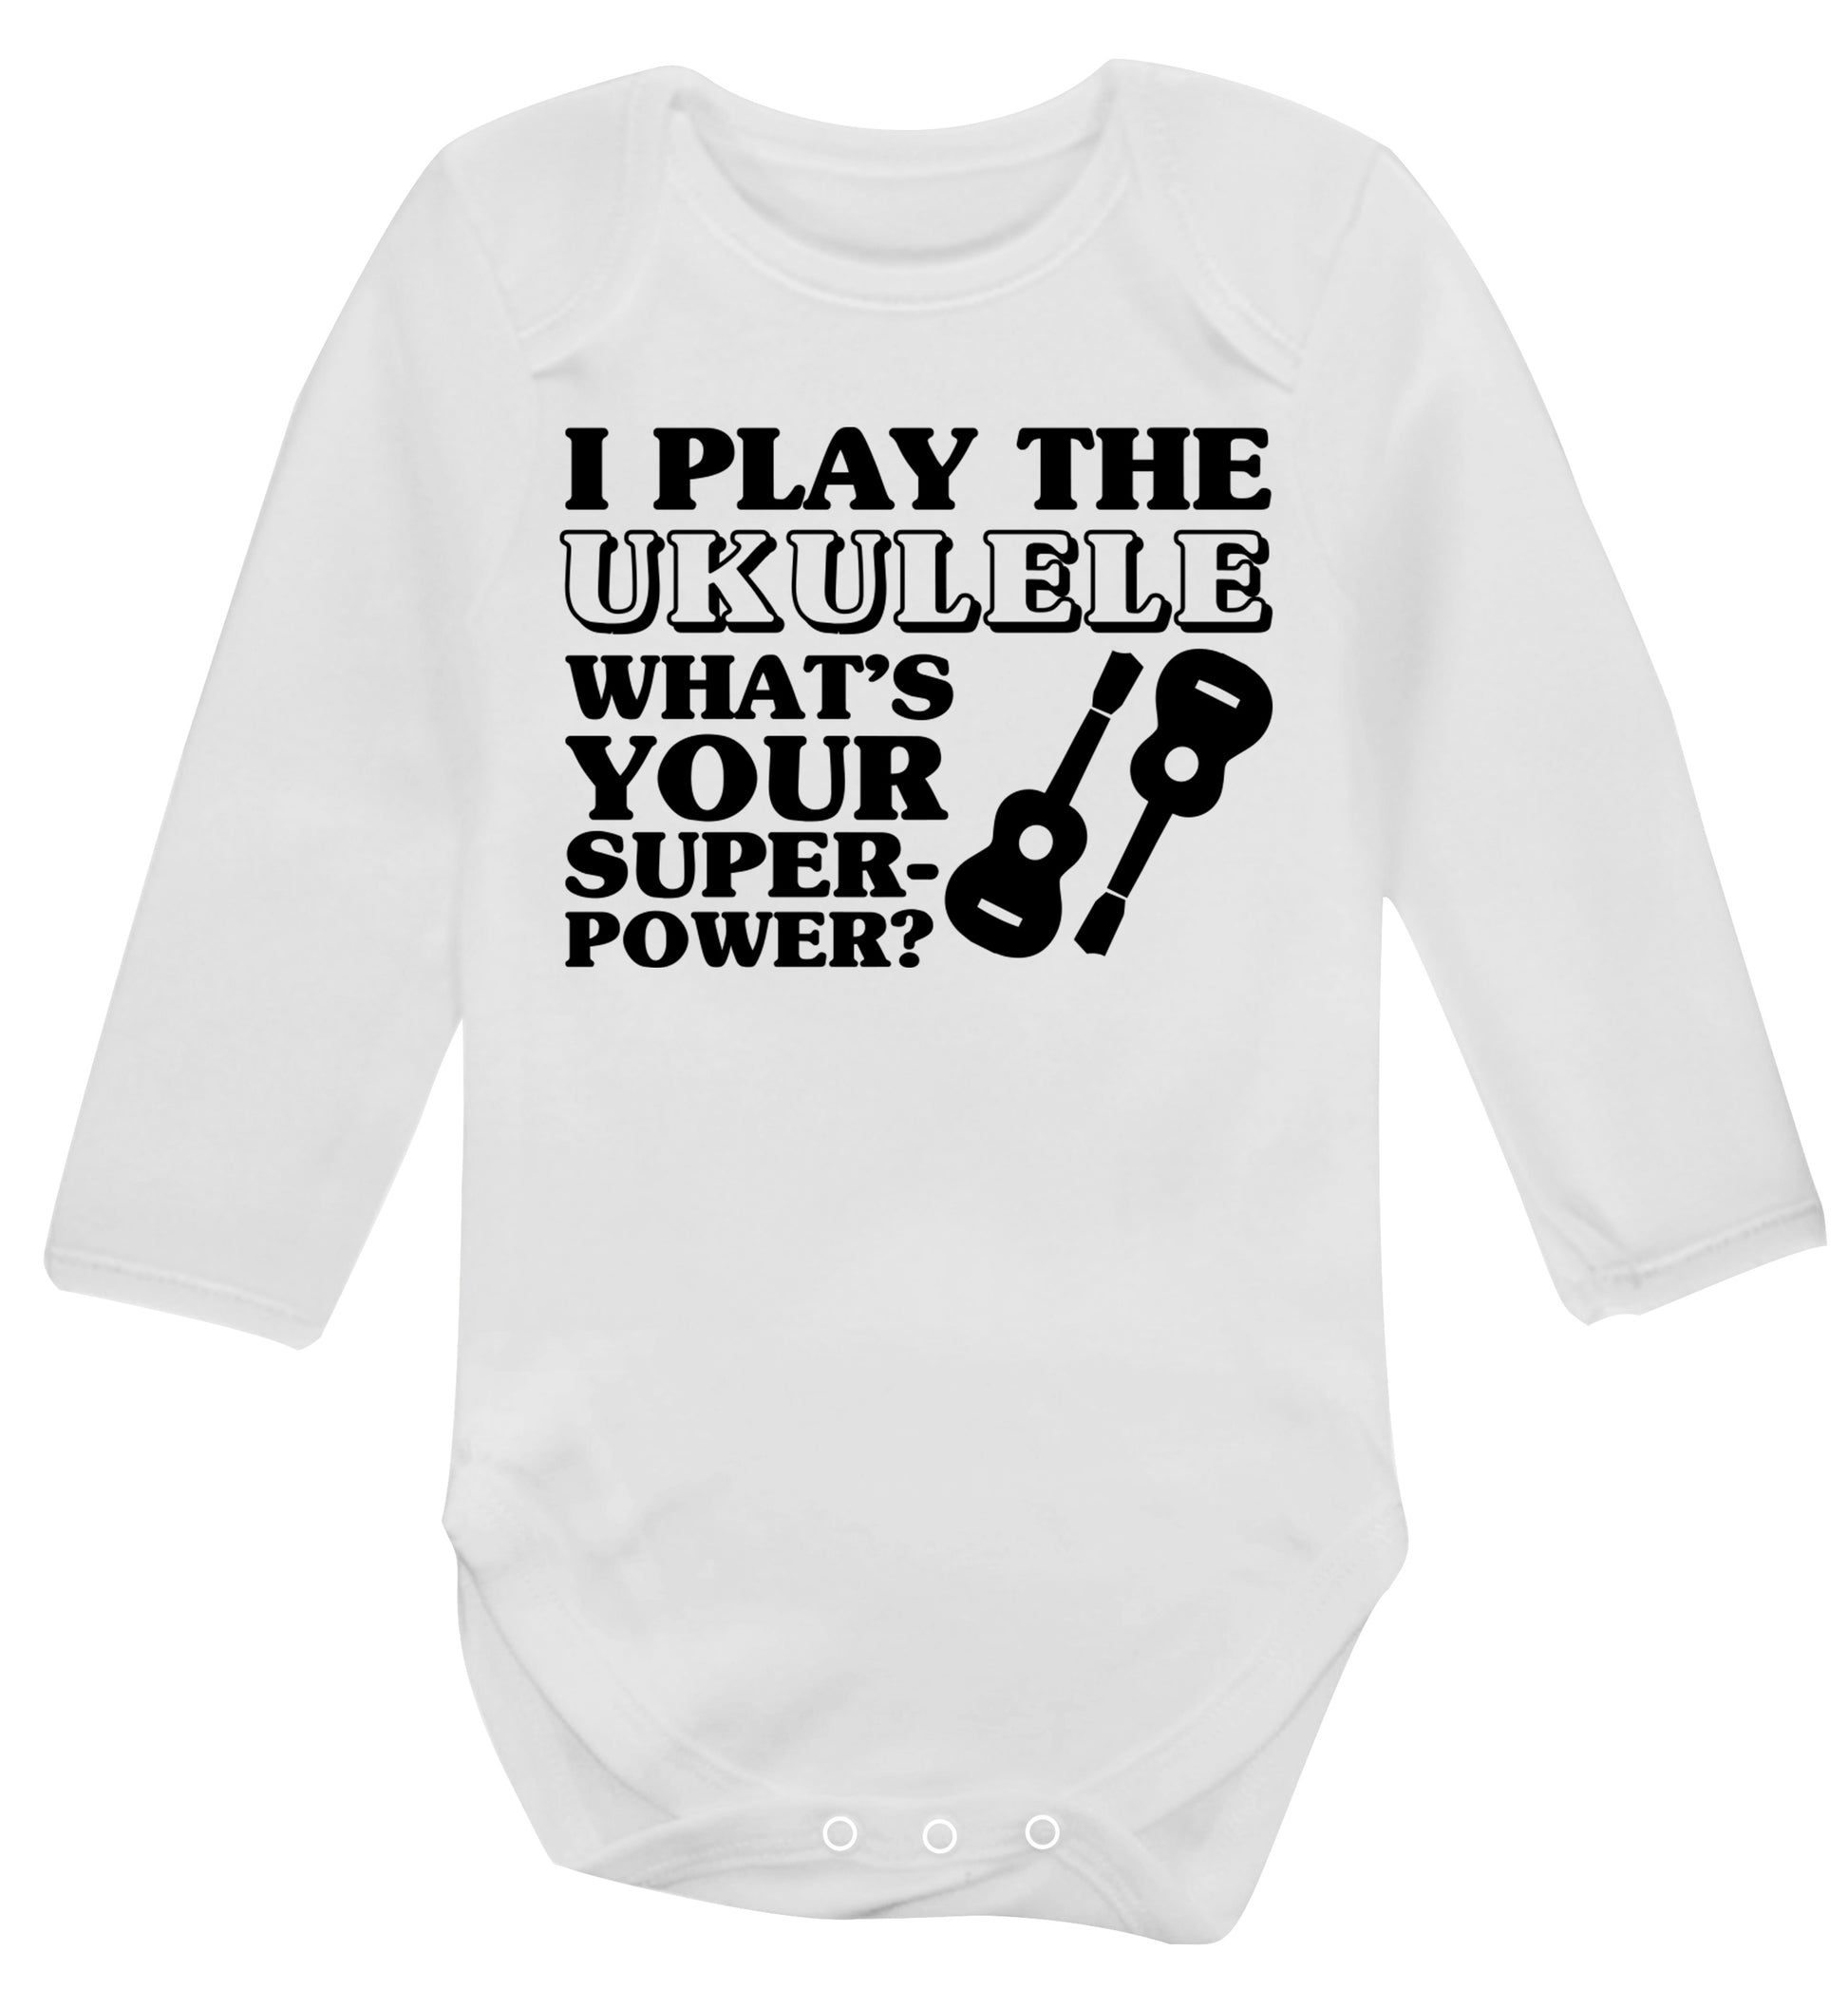 I play the ukulele what's your superpower? Baby Vest long sleeved white 6-12 months